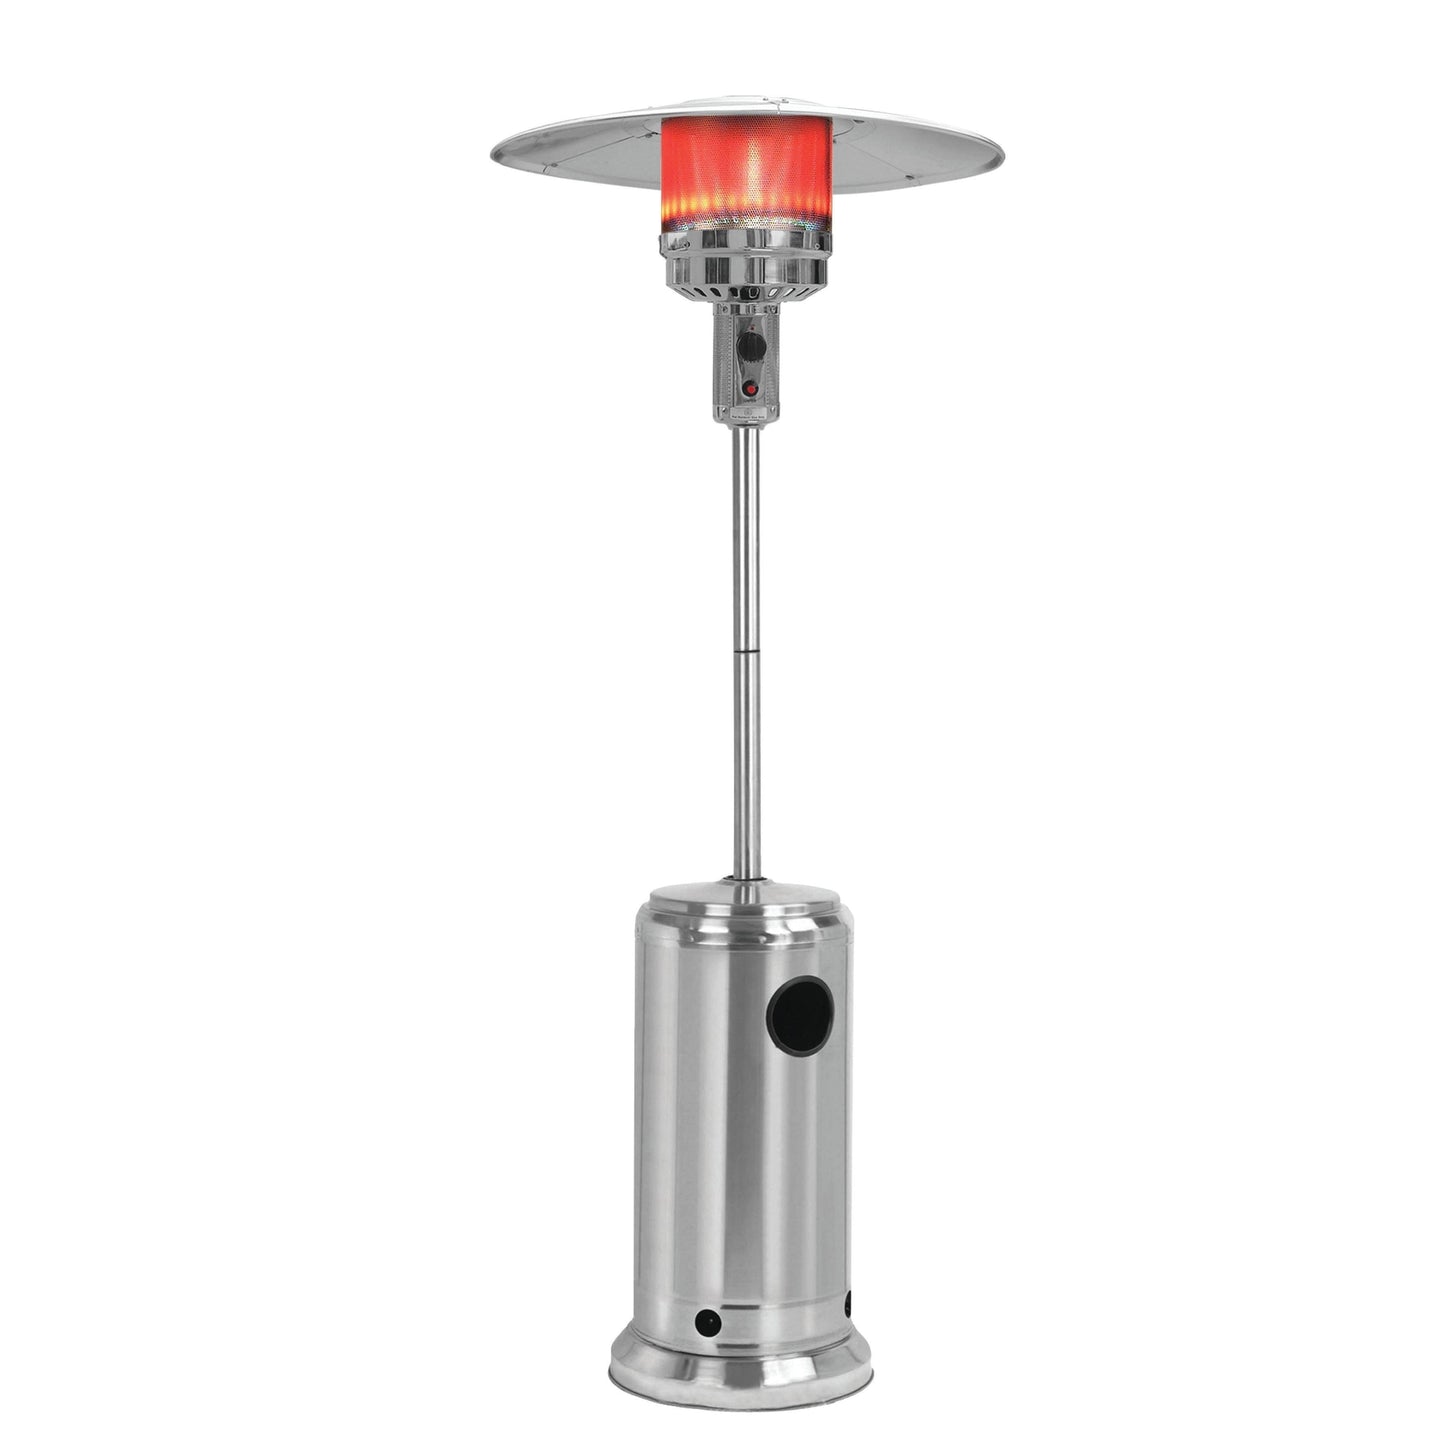 GAS PATIO HEATER - STAINLESS STEEL WITH SEGMENTED POLE